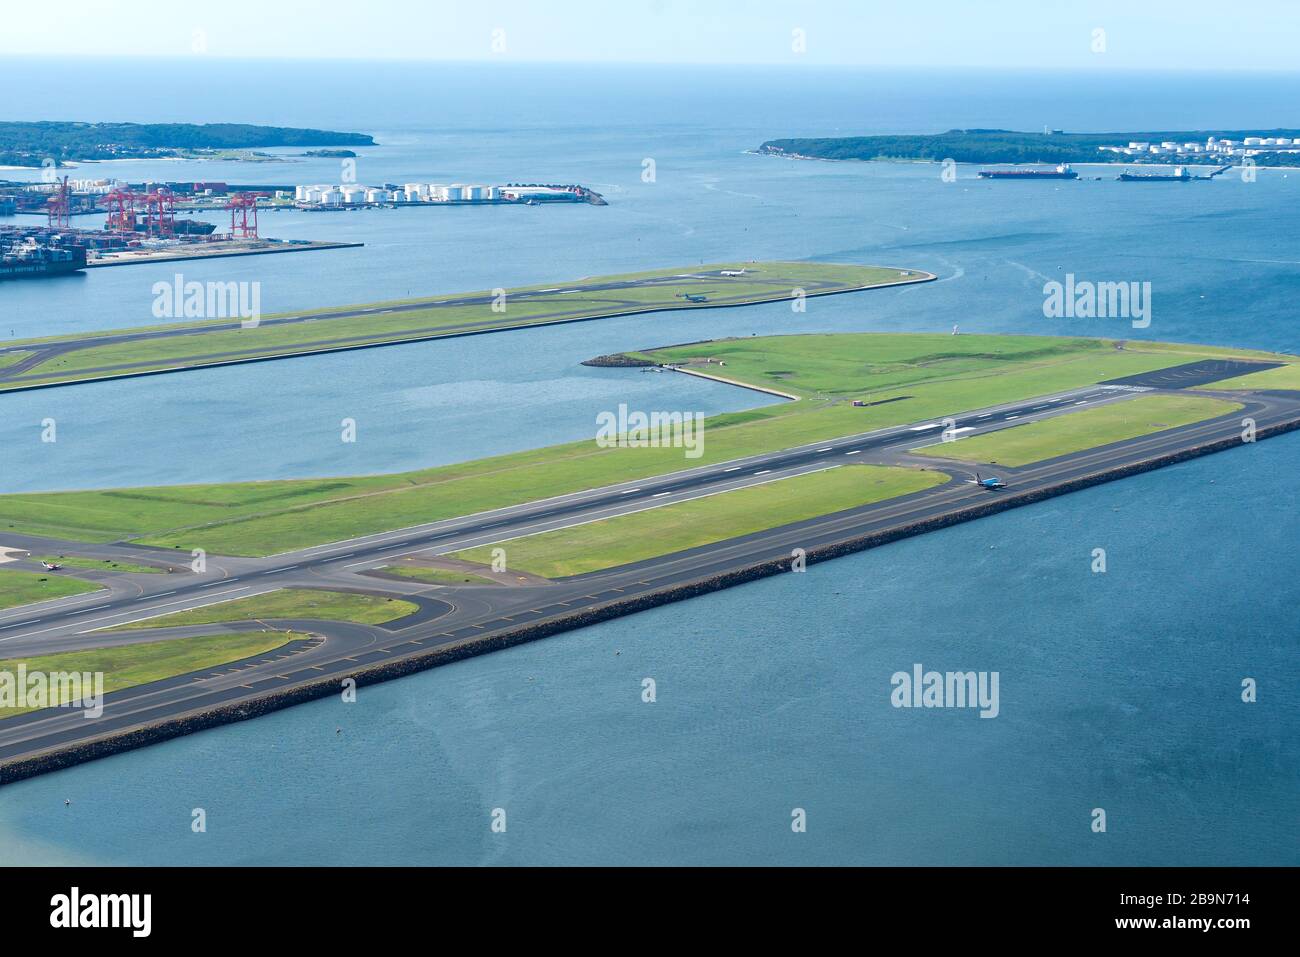 Airport runway built in reclaimed terrain at Sydney Kingsford Smith International Airport (SYD / YSSY), Australia. Reclaimed area in Botany Bay. Stock Photo